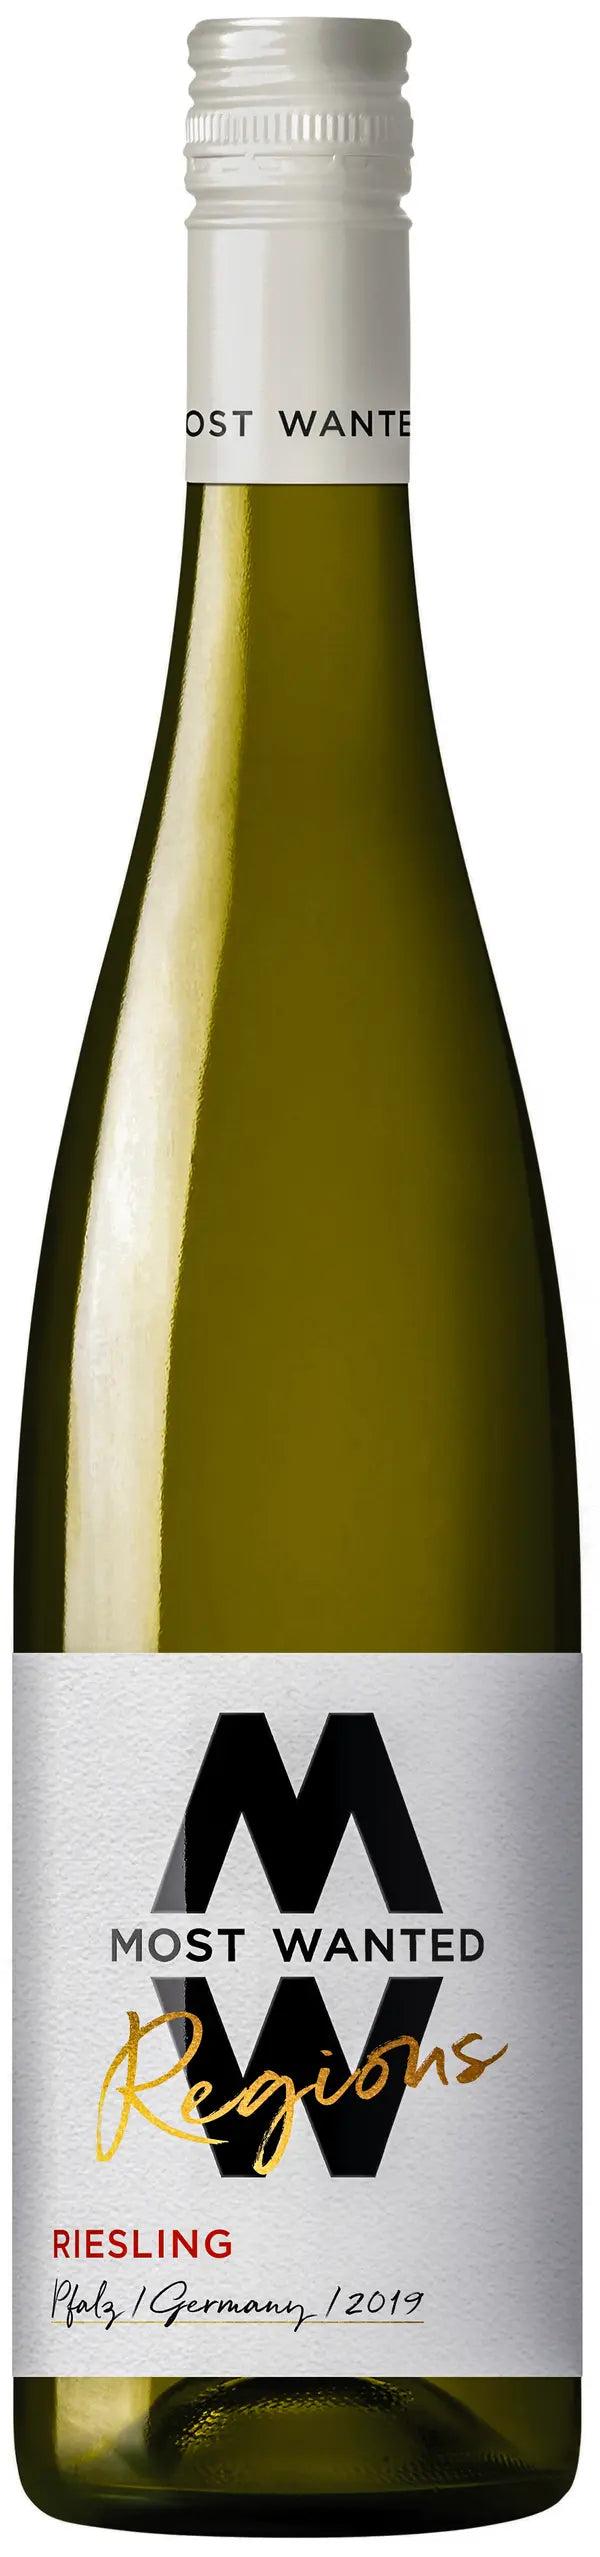 Most Wanted Regions Riesling